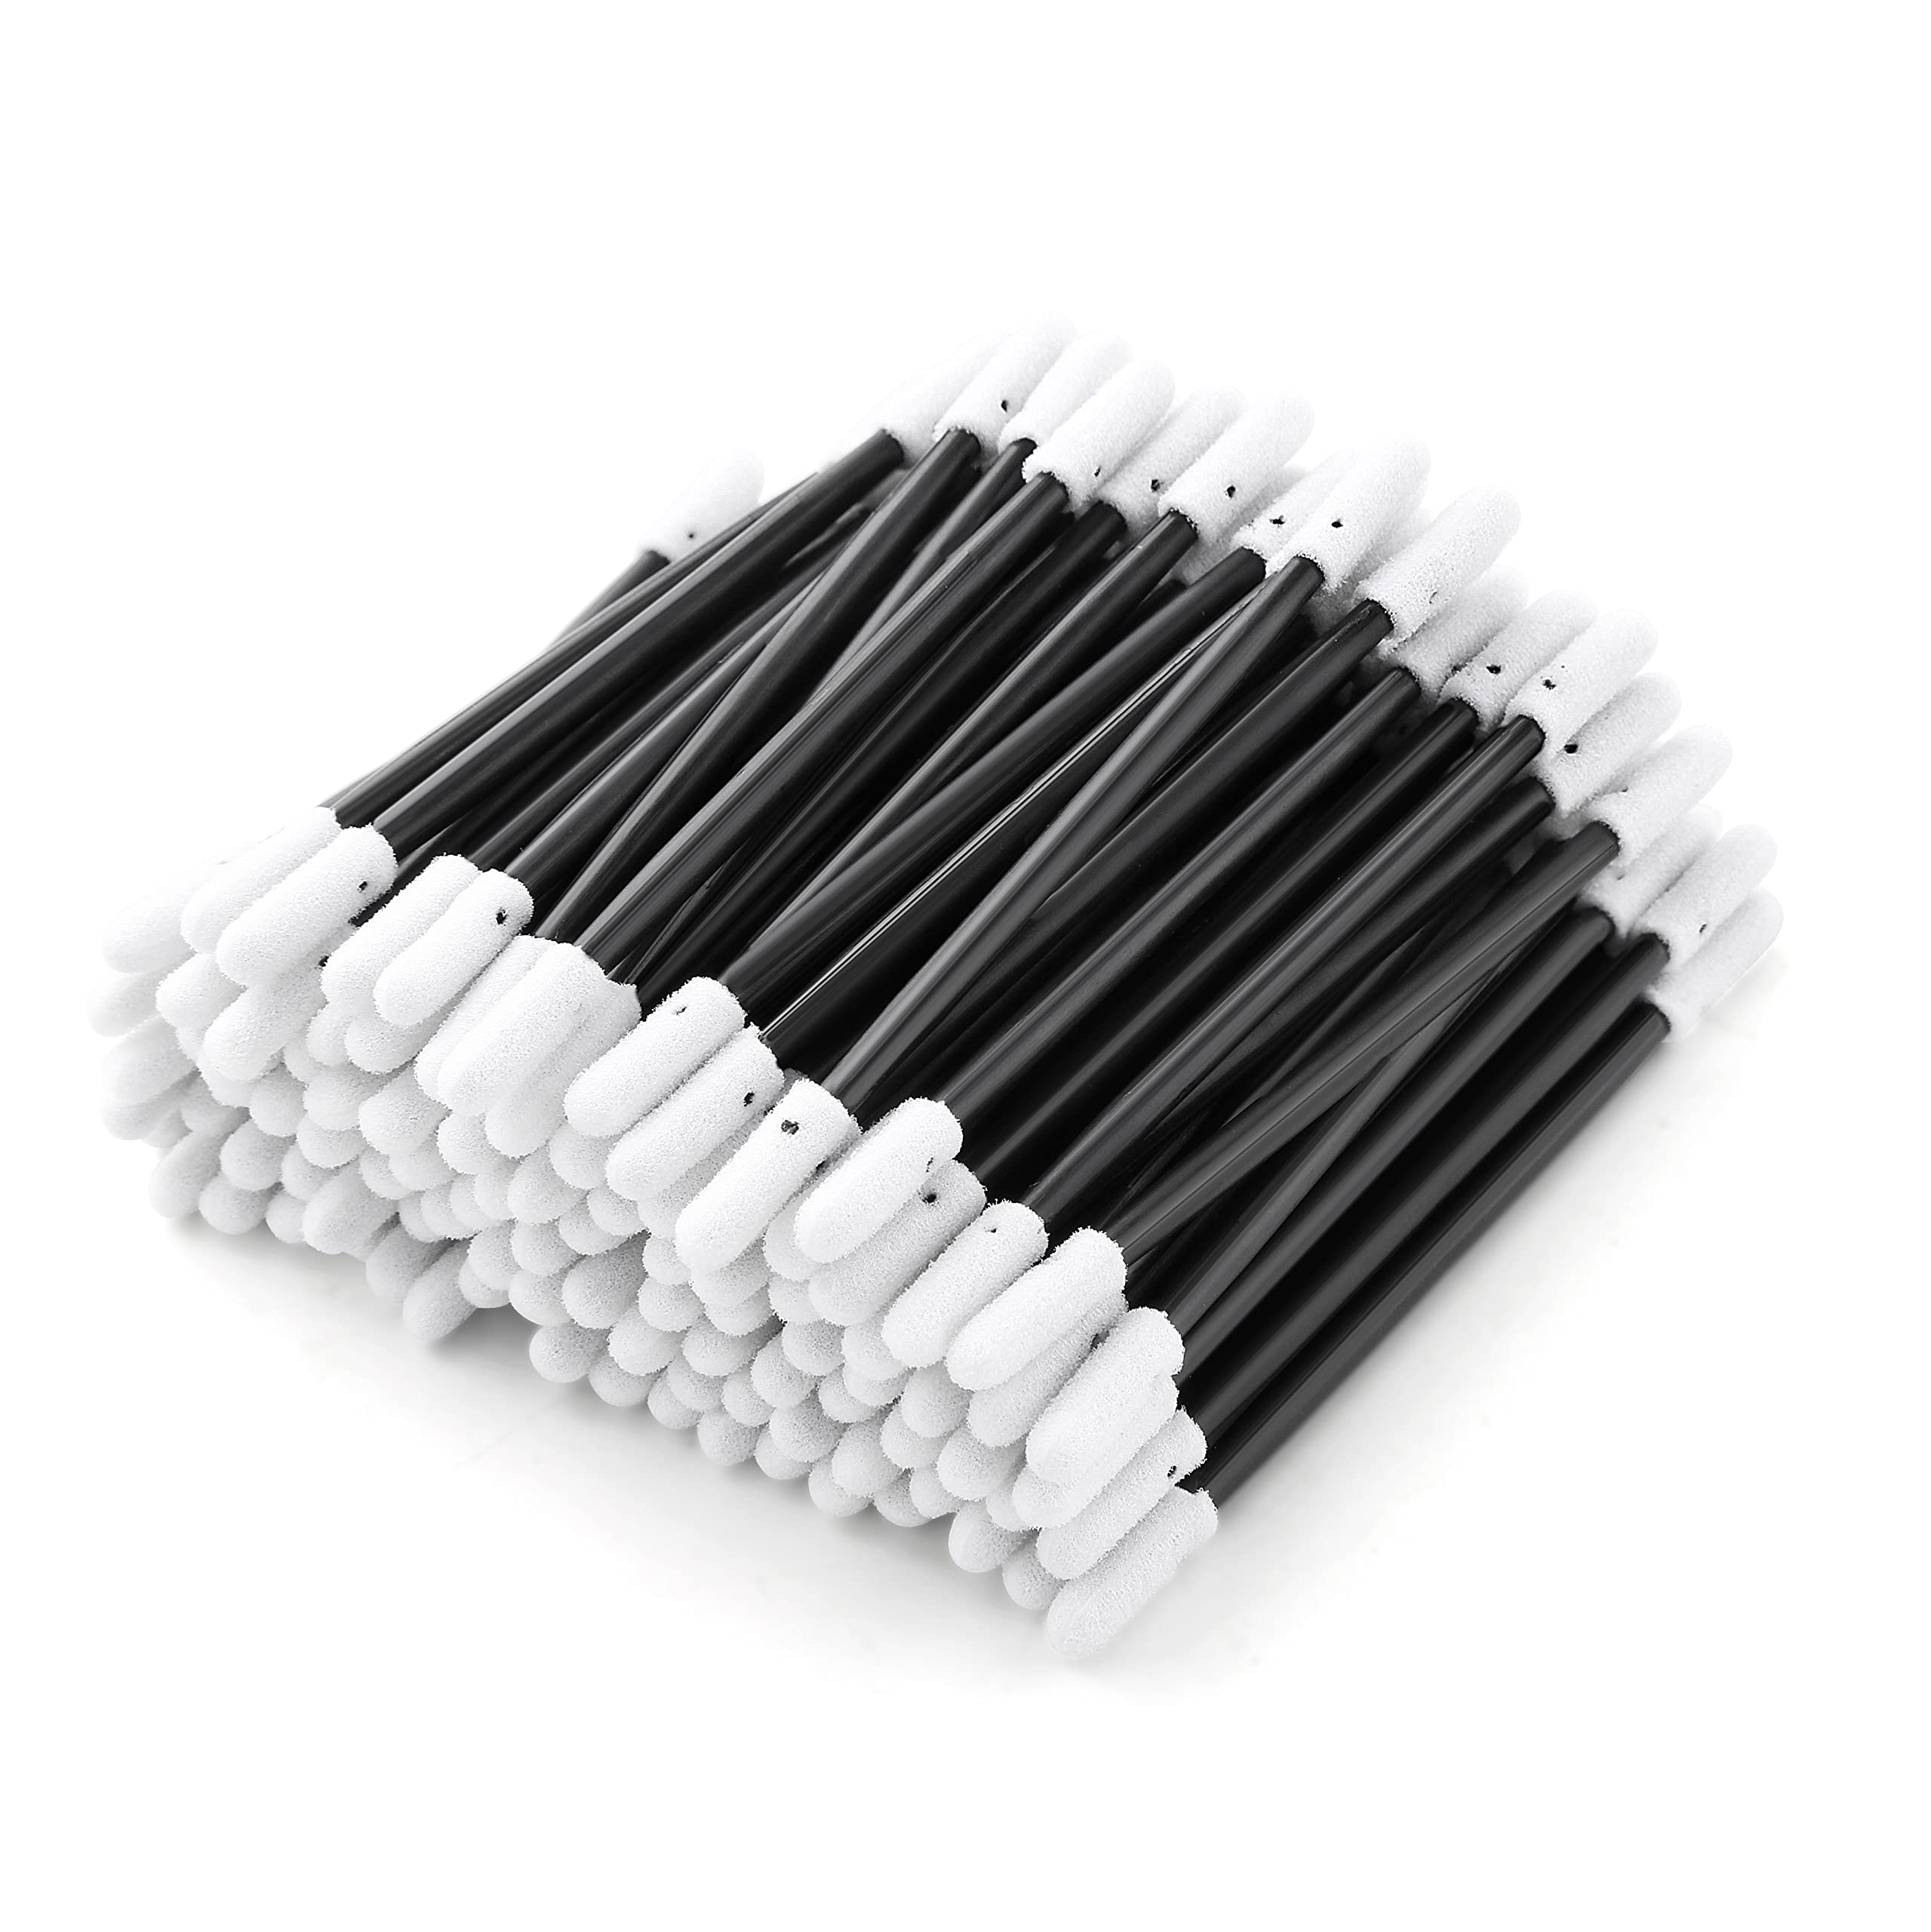 Navy Blue 3" Double-Headed Foam Swab Cleaning Sticks (1,000pcs, 3.2 mm Round Head, 76 mm Length), for Cleaning Tiny Grooved Areas (NO. AD7220)